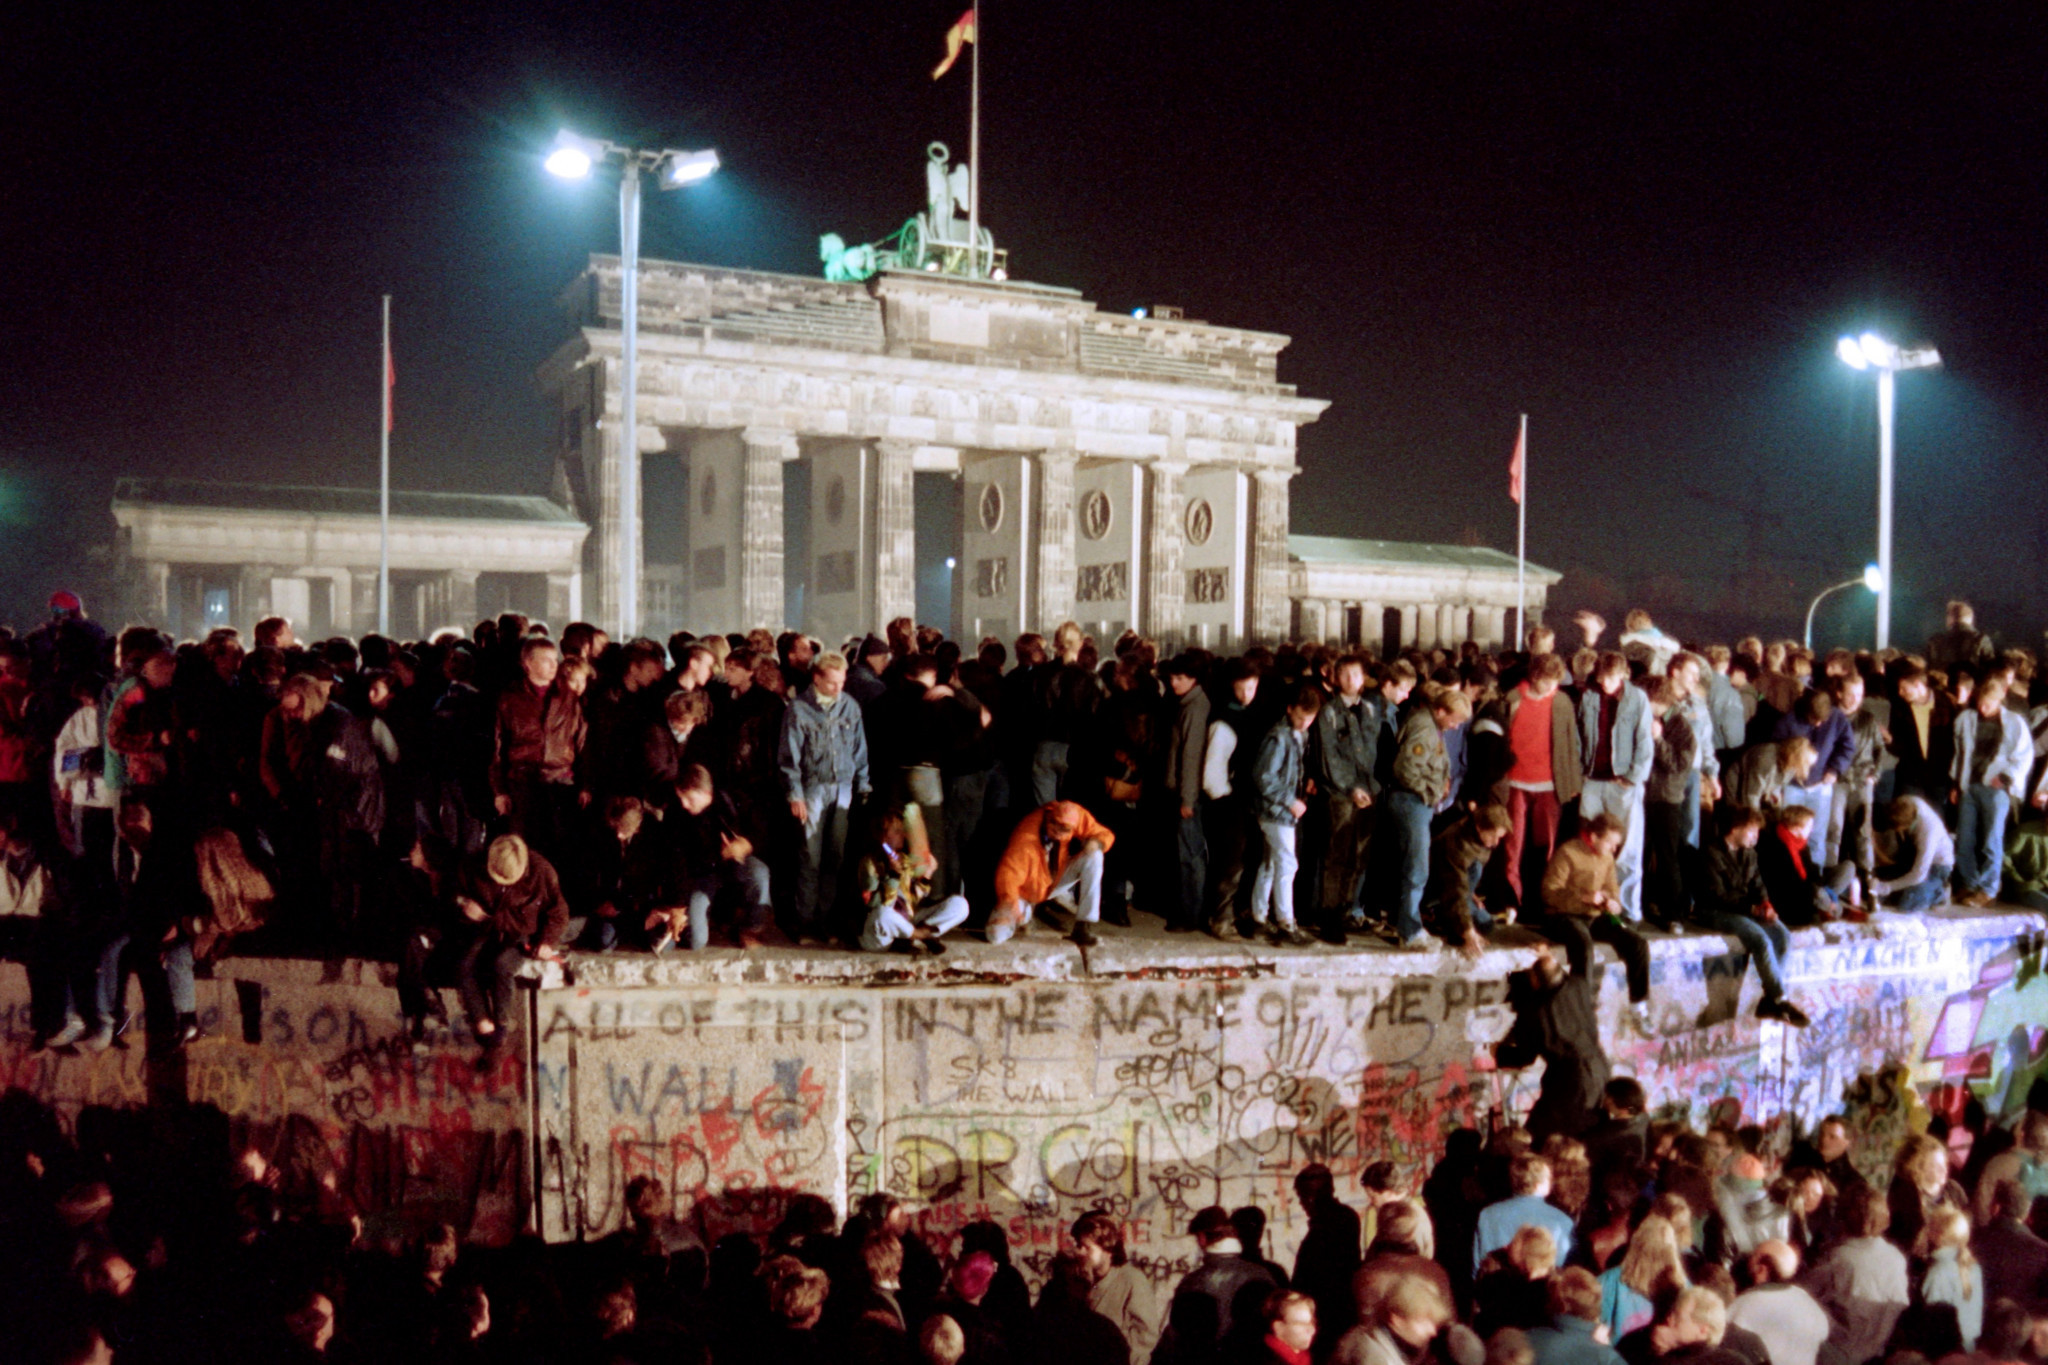 Berlin has served as a powerful metaphor for breaking down barriers since the fall of its Wall in 1989 ©Getty Images